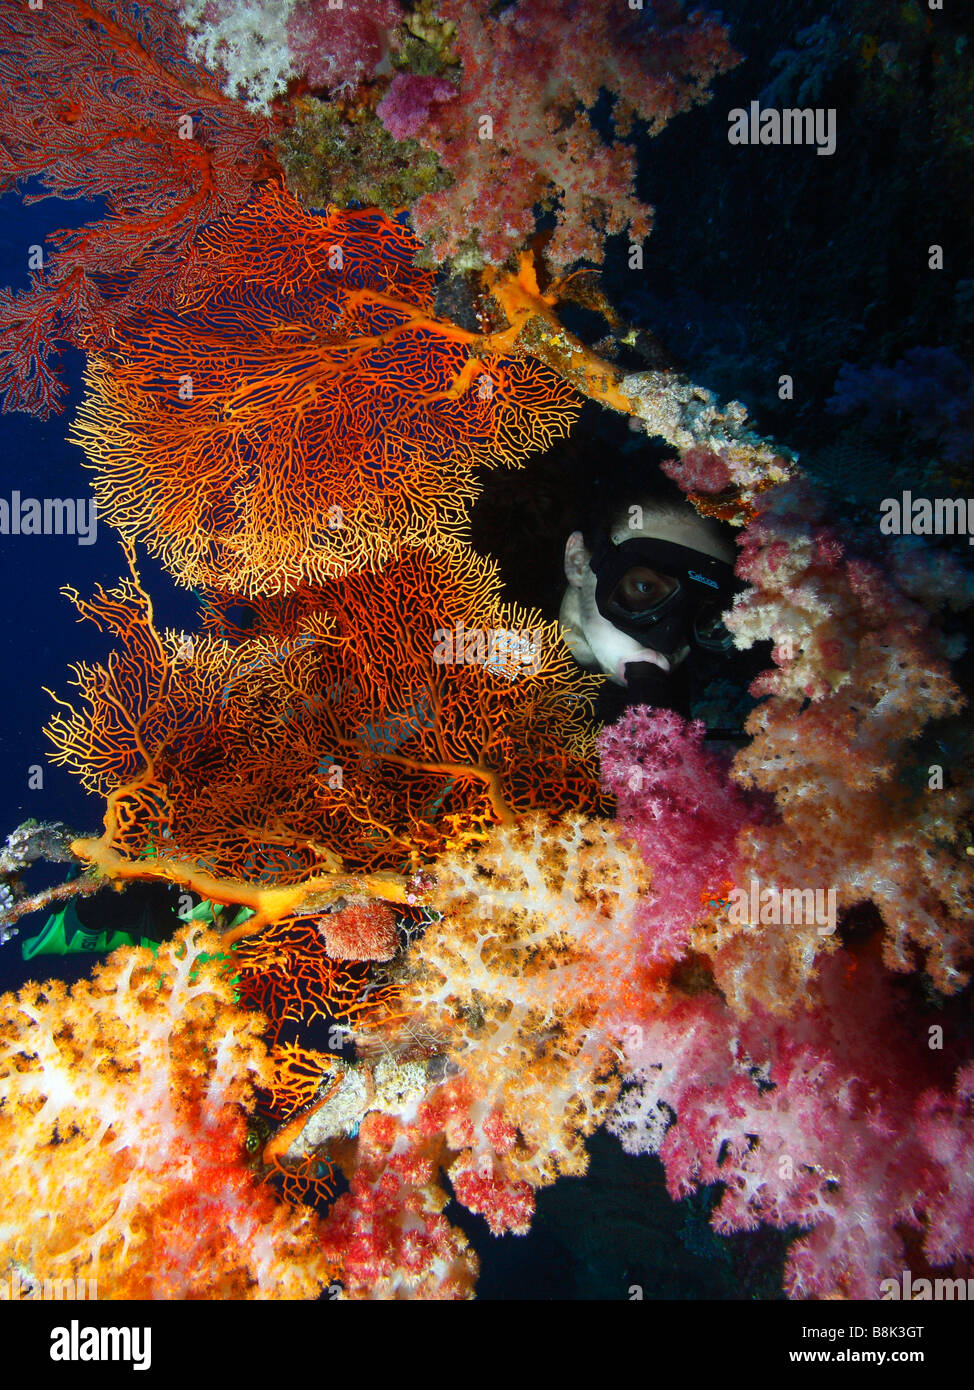 A young female diver exploring the gorgonia fans and colorful red, magenta and yellow soft corals growing on a sea wall. Stock Photo